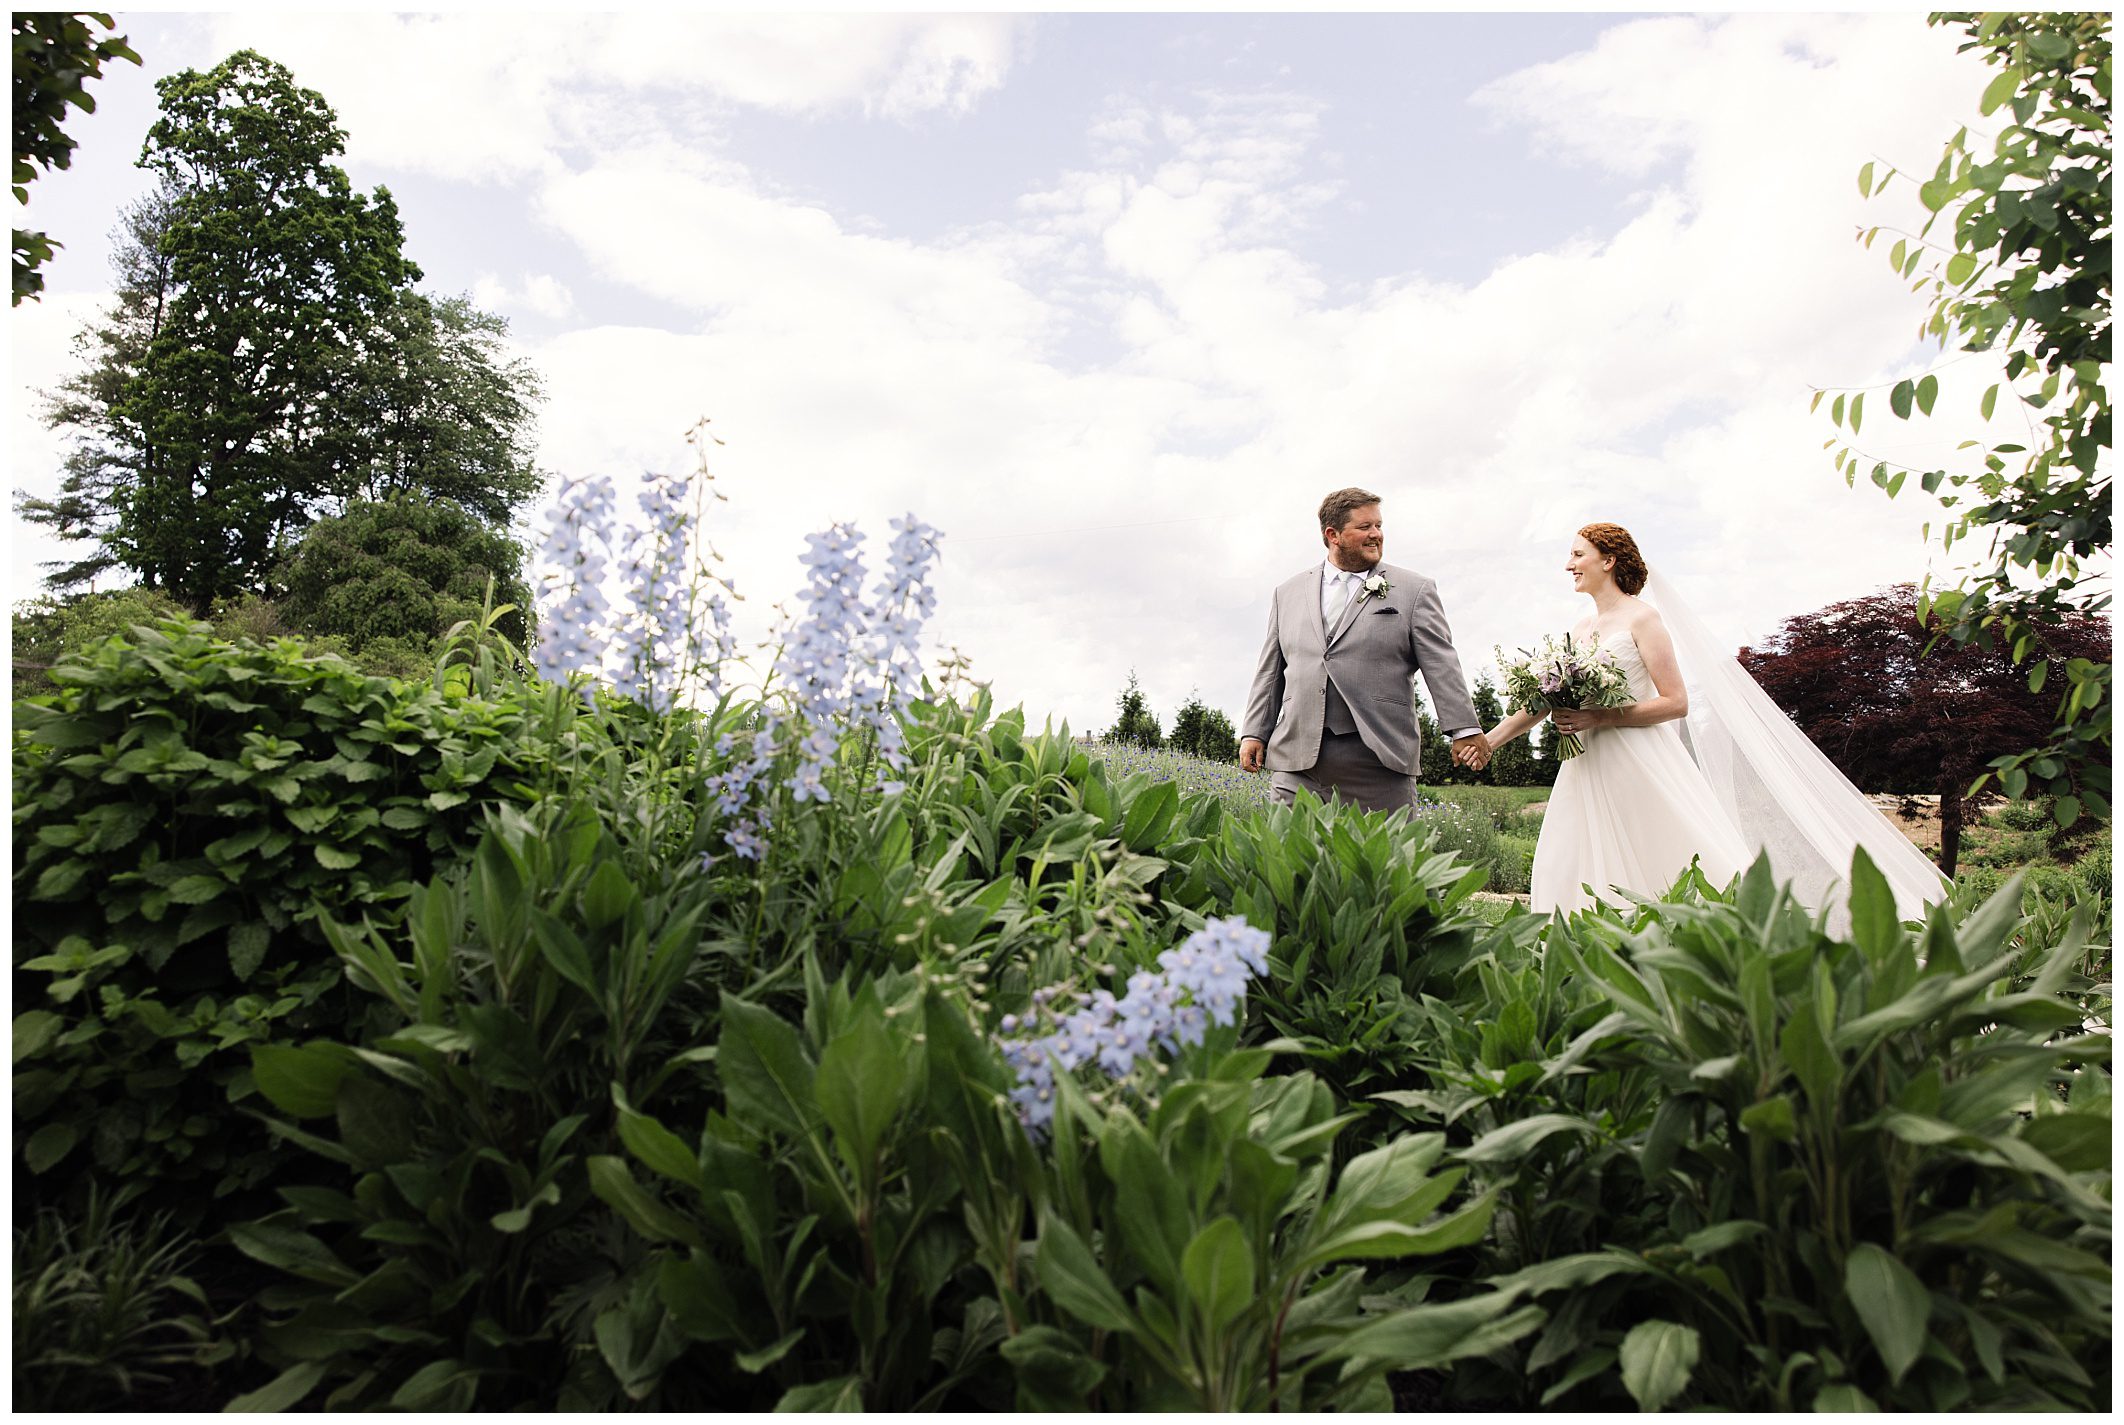 A bride and groom walk hand-in-hand through a lush garden with tall green plants and blue flowers under a partly cloudy sky.